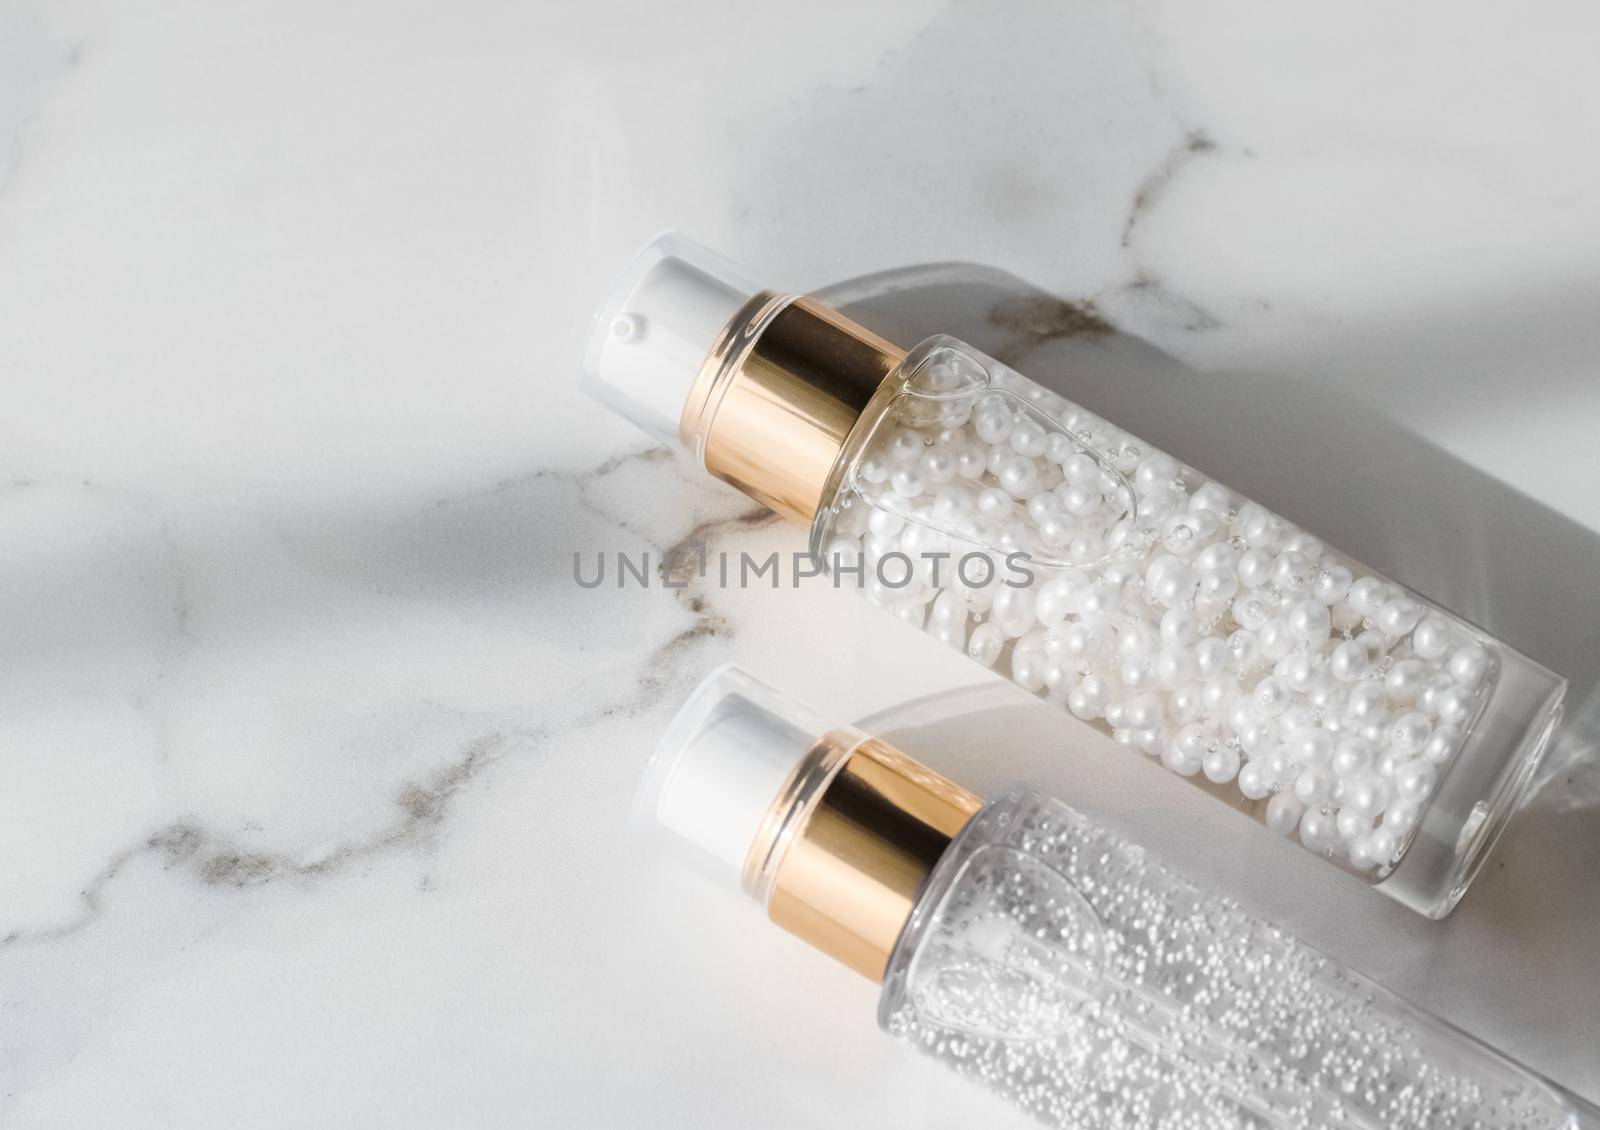 Cosmetic branding, packaging and make-up concept - Skin care serum and gel bottle, moisturizing lotion and lifting cream emulsion on marble, anti-age cosmetics for luxury beauty skincare brand design